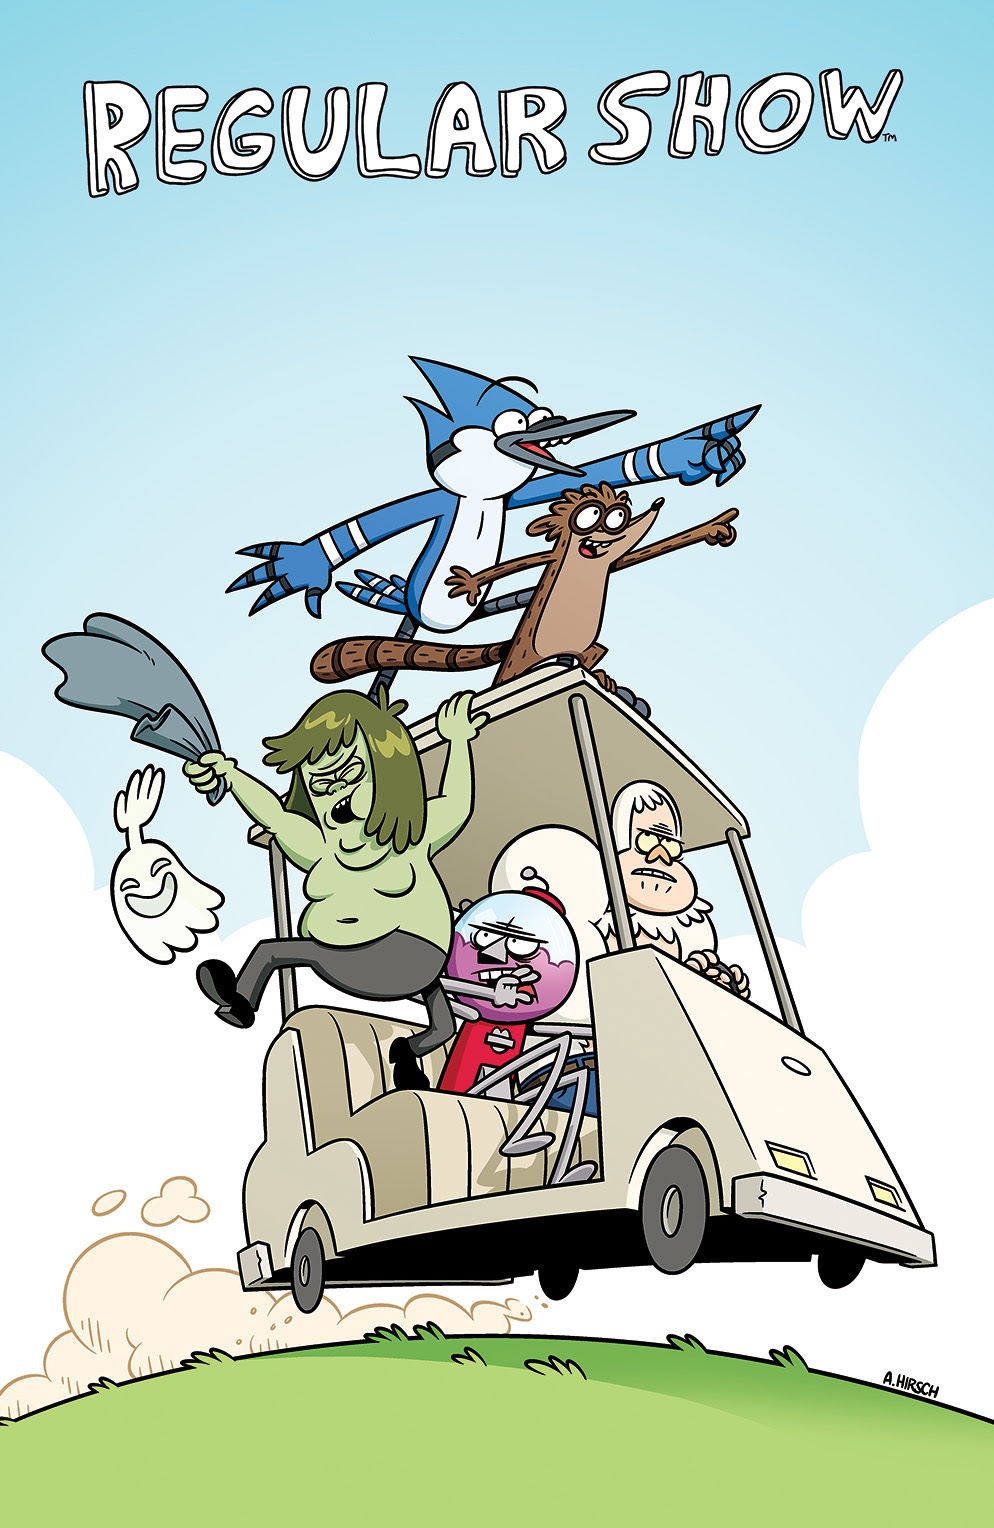 REGULAR SHOW #18 Cover A by Andy Hirsch